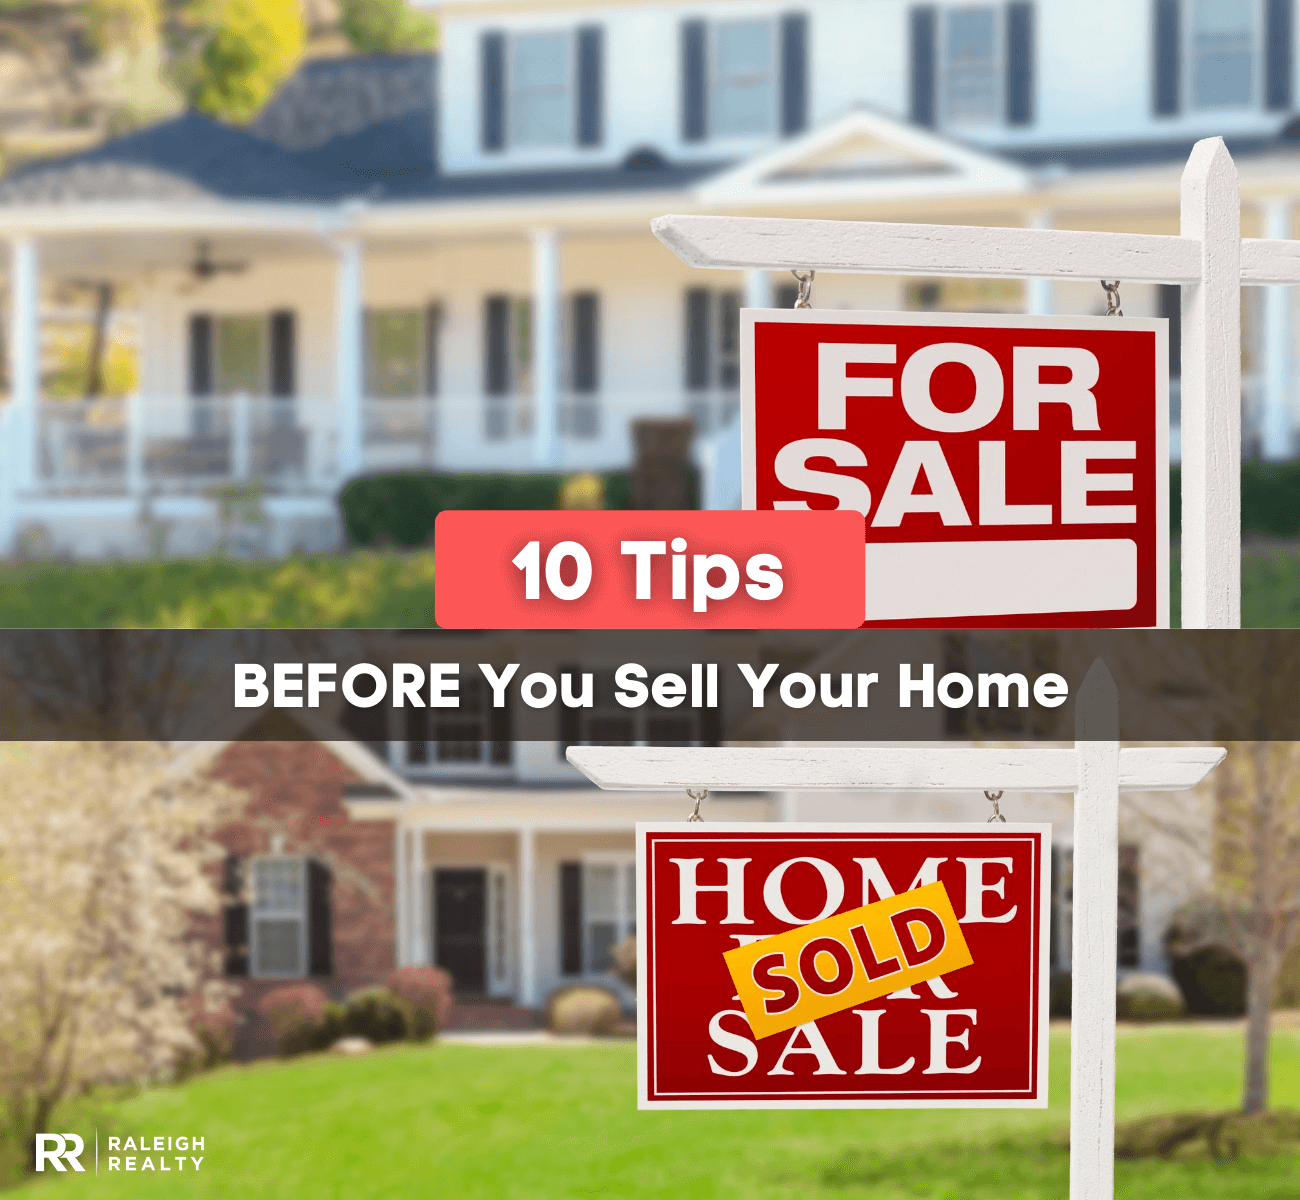 How To Buy A House Before You Sell Yours 10 Real Estate Tips BEFORE You Sell Your Home